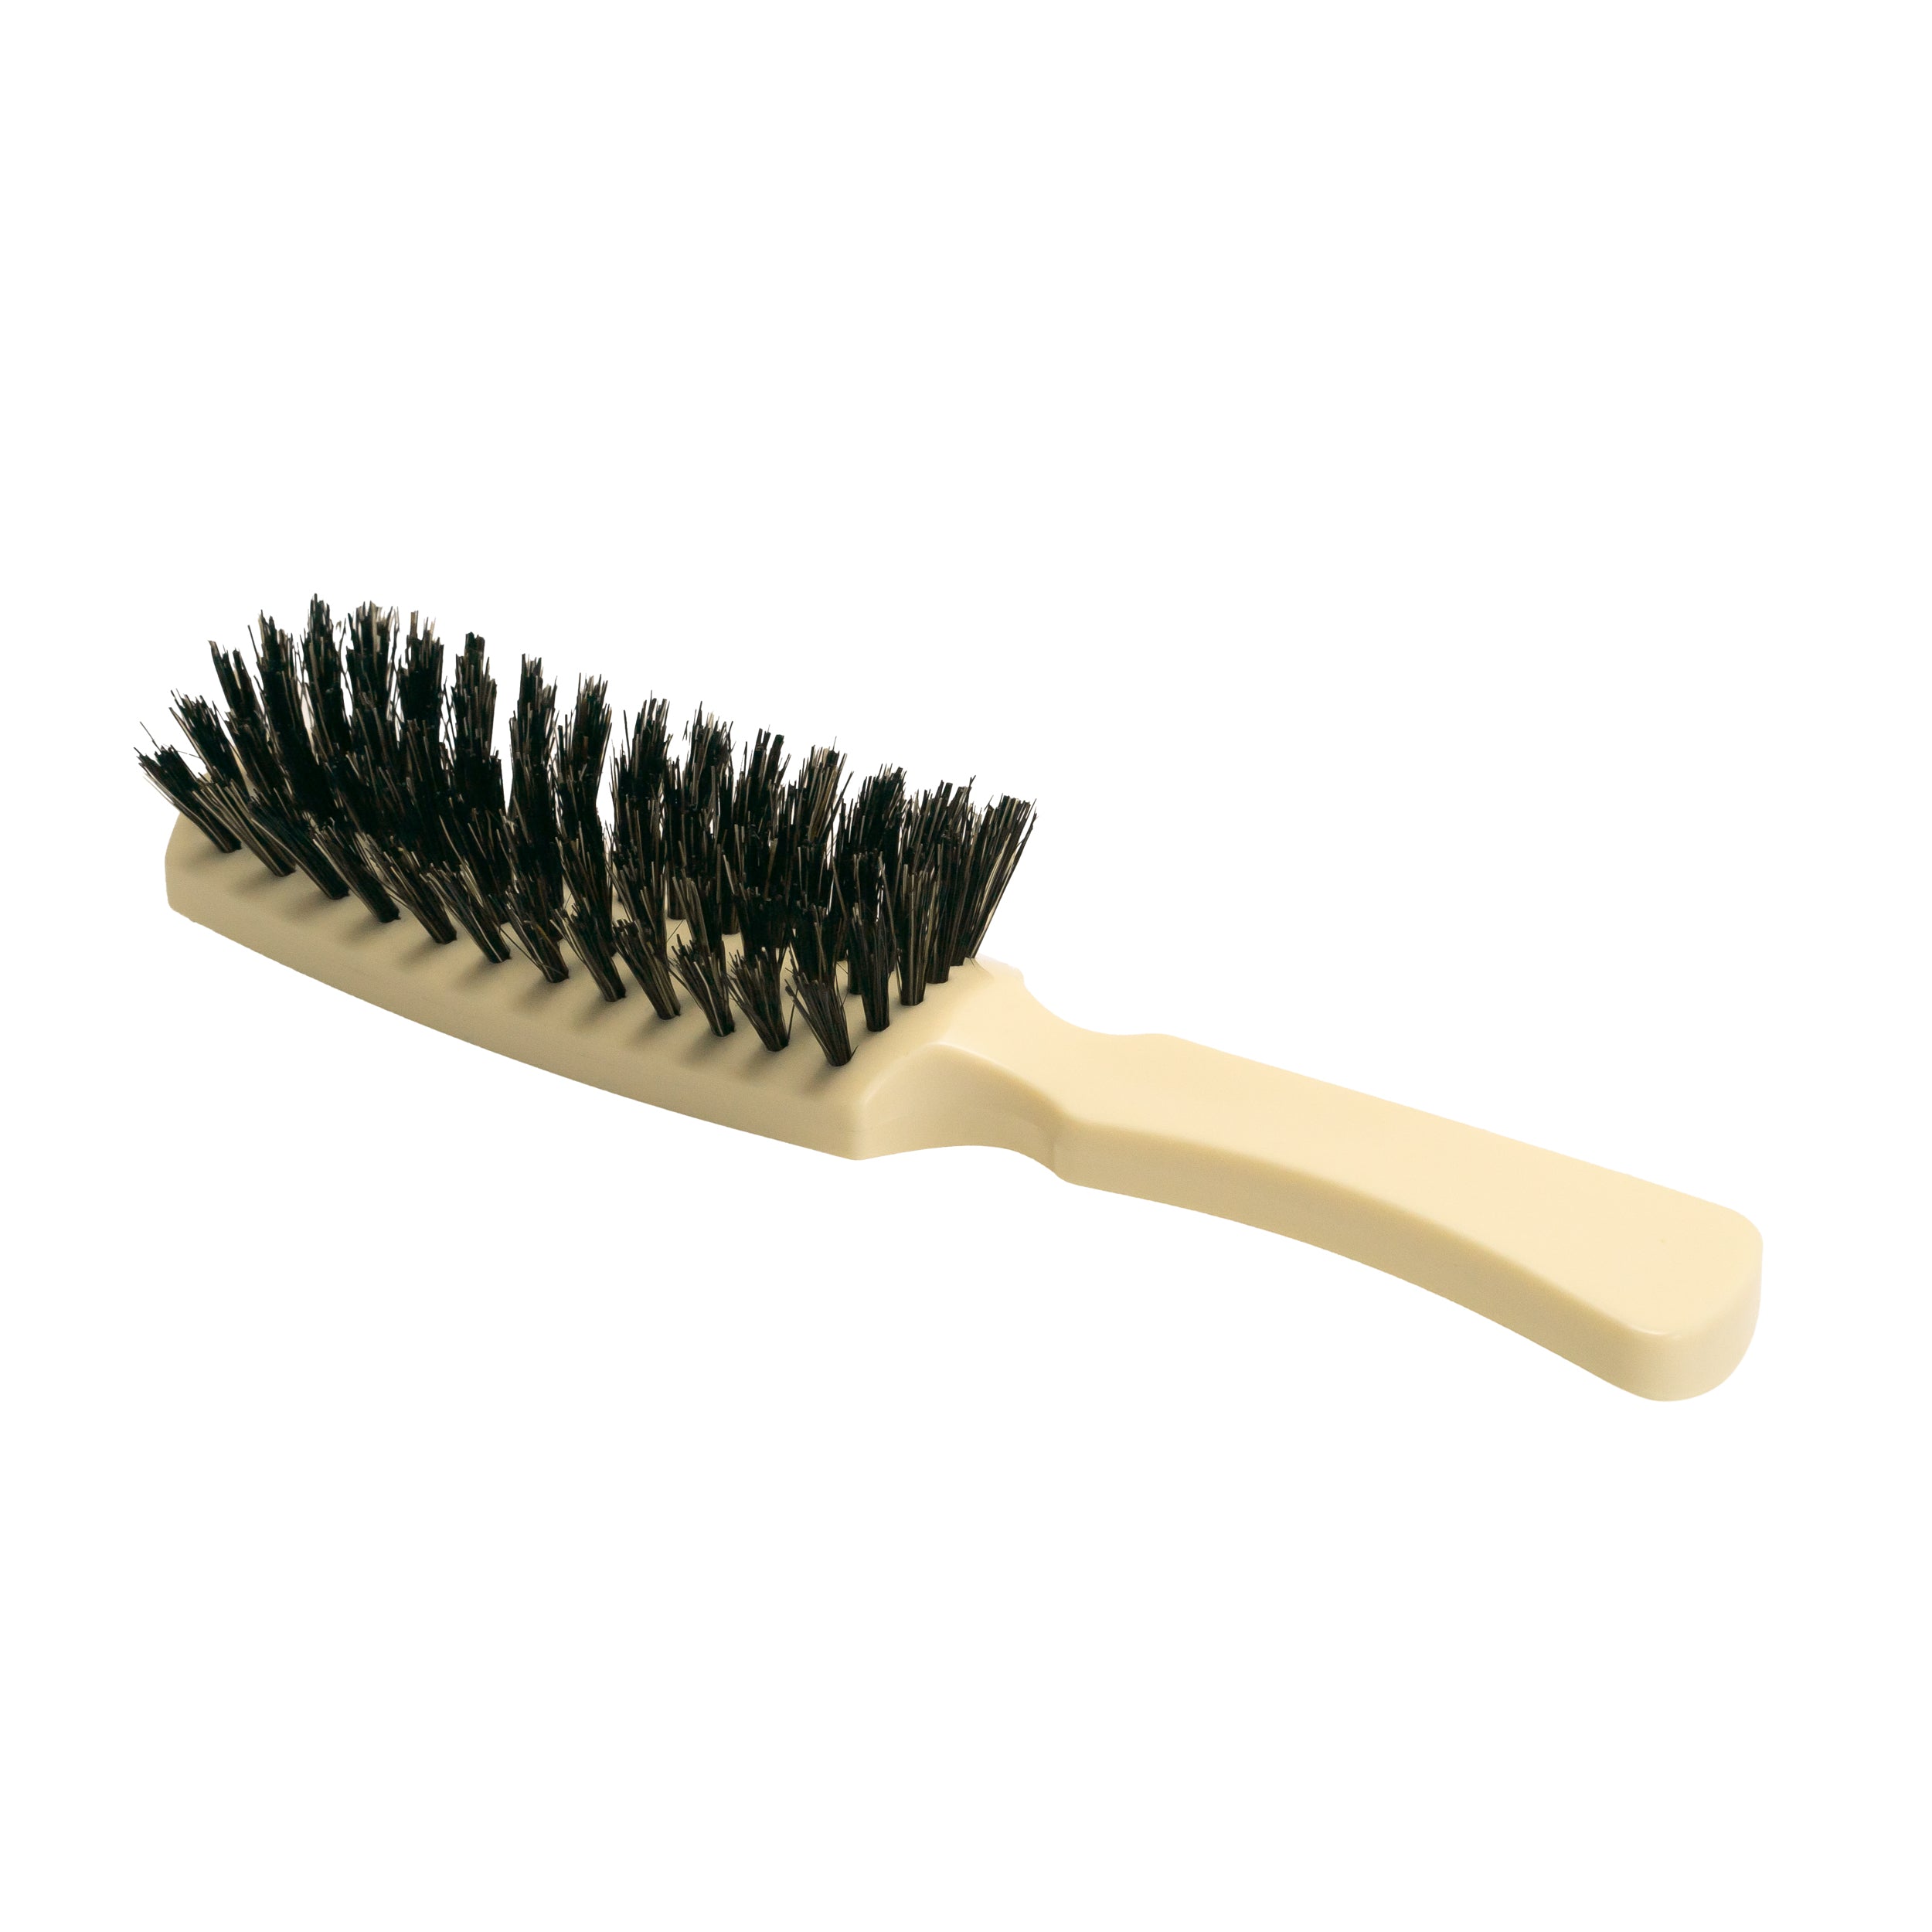 My hair dresser told me to get a boar bristle brush for smoother hair